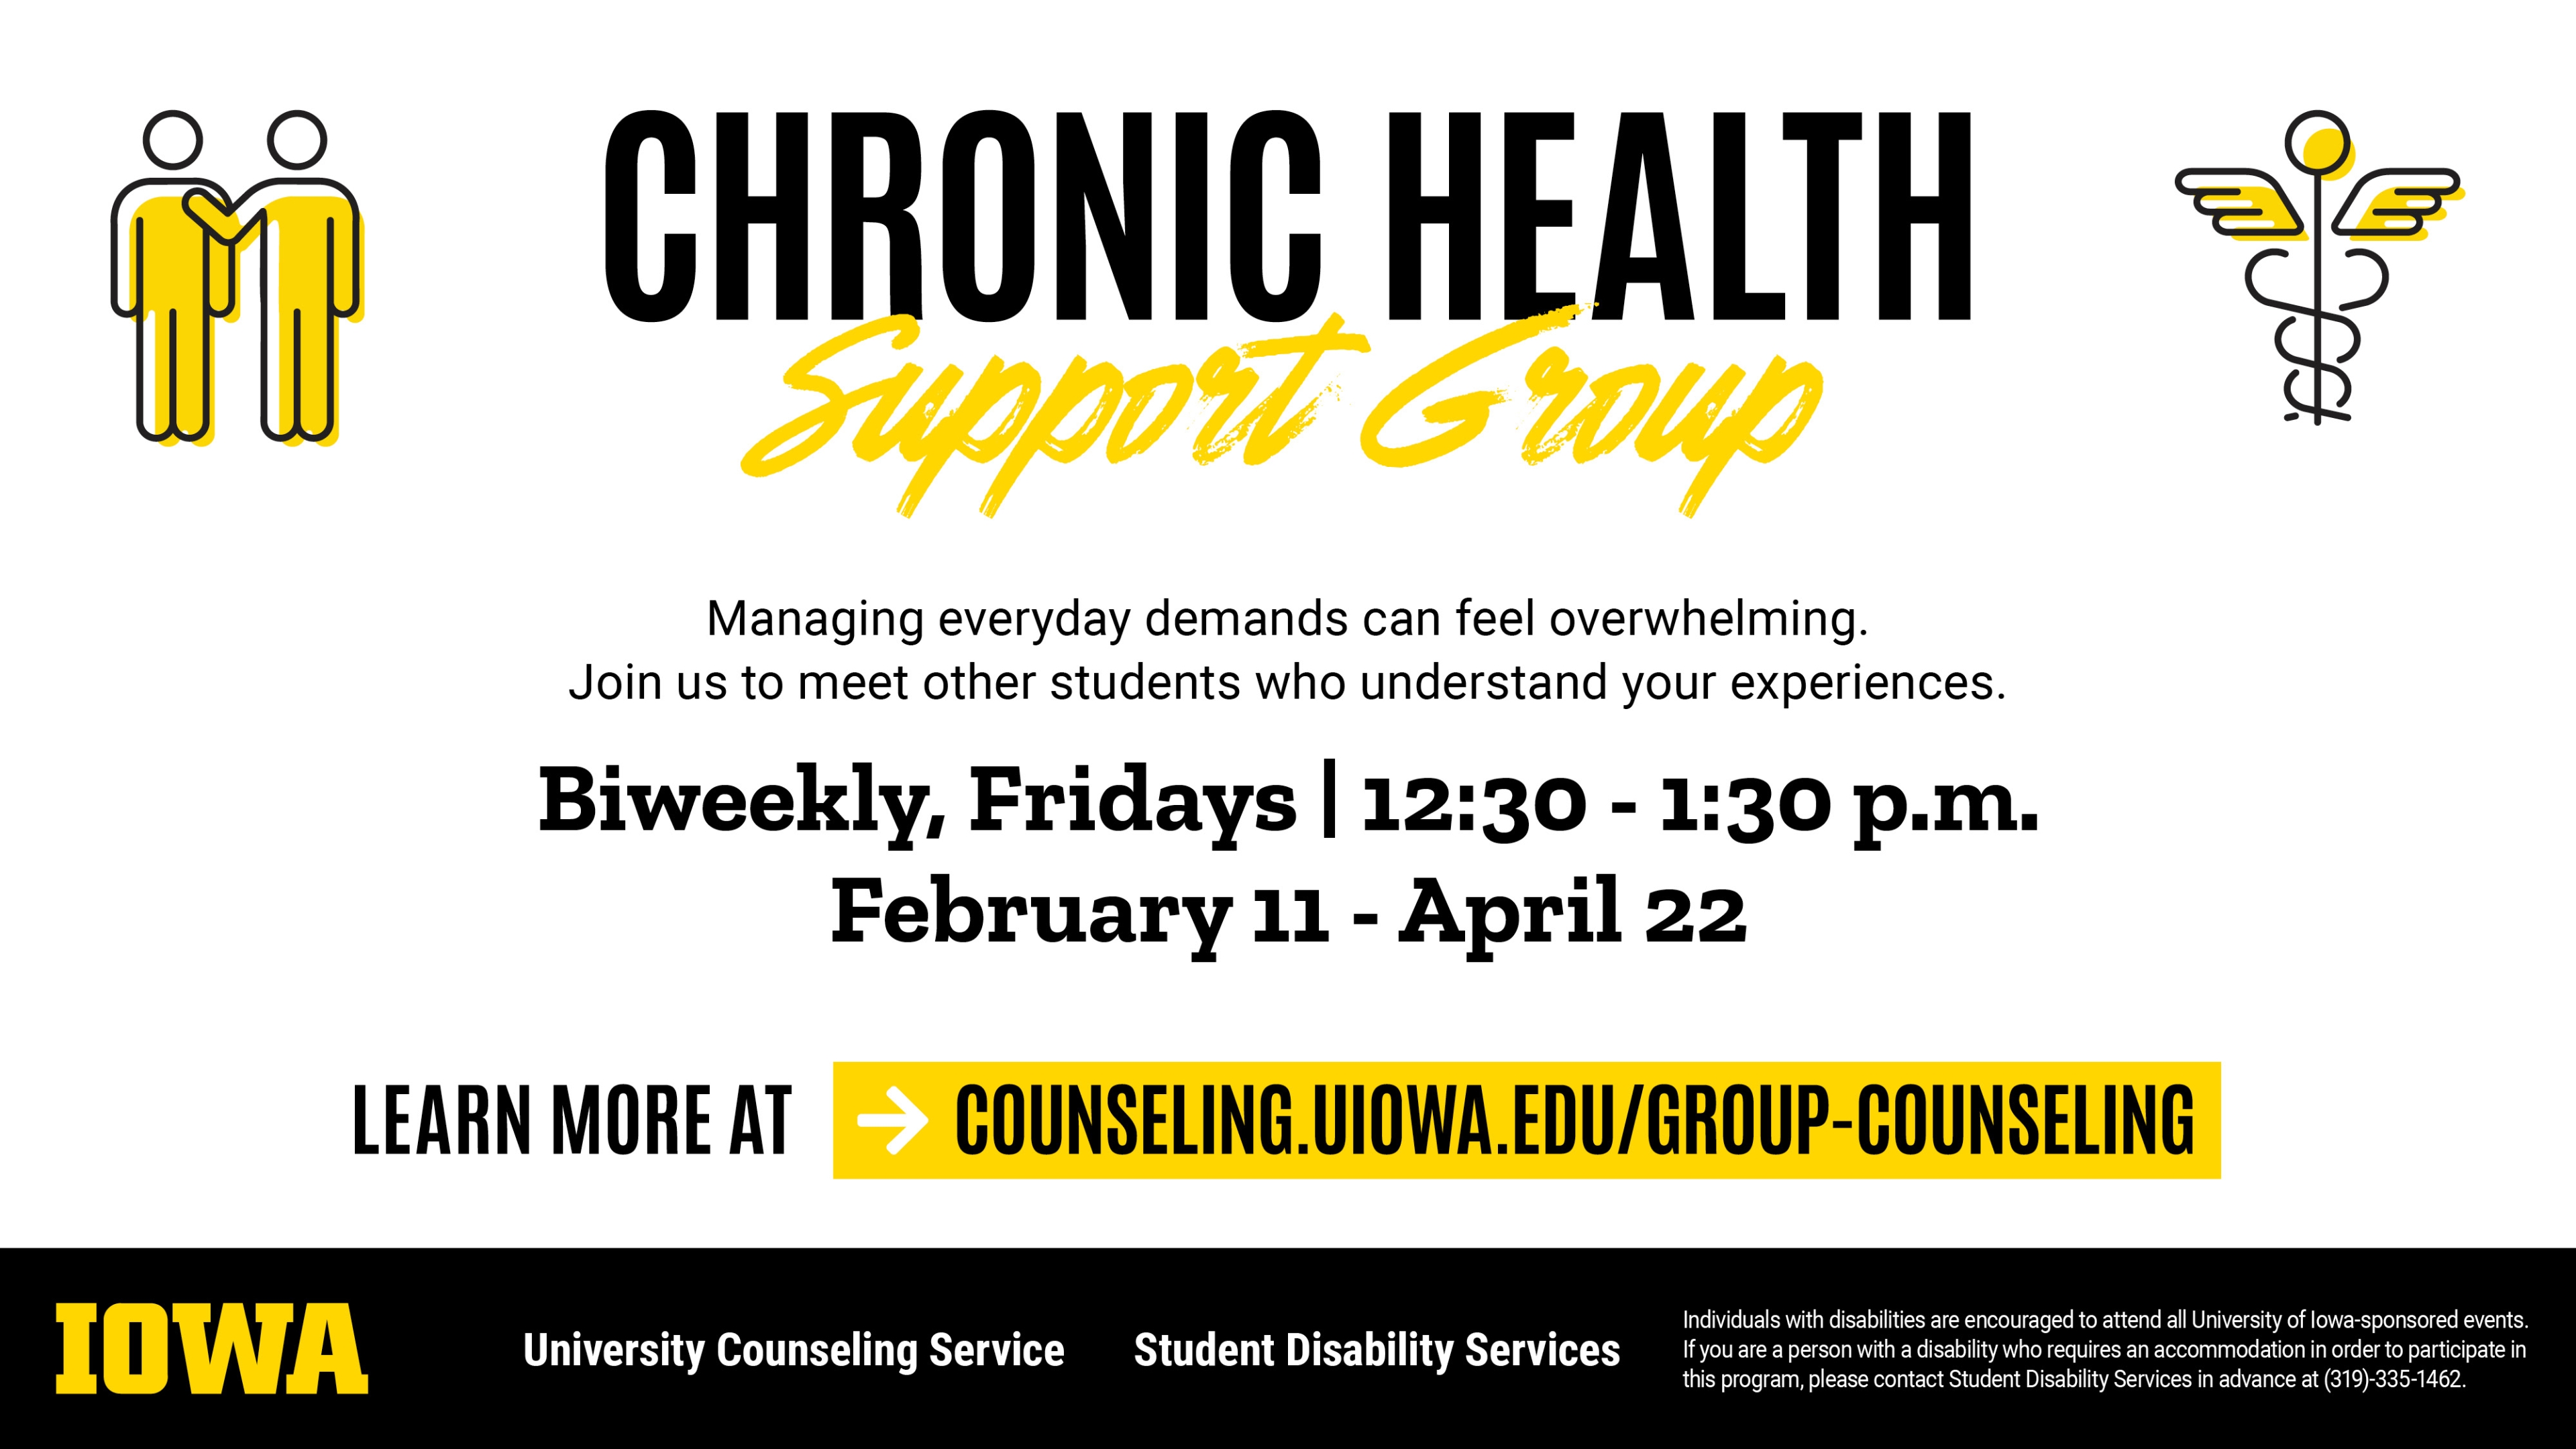 Chronic Health Support Group. Managing everyday demands can feel overwhelming. Join us to meet other students who understand your experiences. Biweekly, Fridays | 12:30 - 1:30 p.m. February 11 - April 22 Learn more at counseling.uiowa.edu/group-counseling